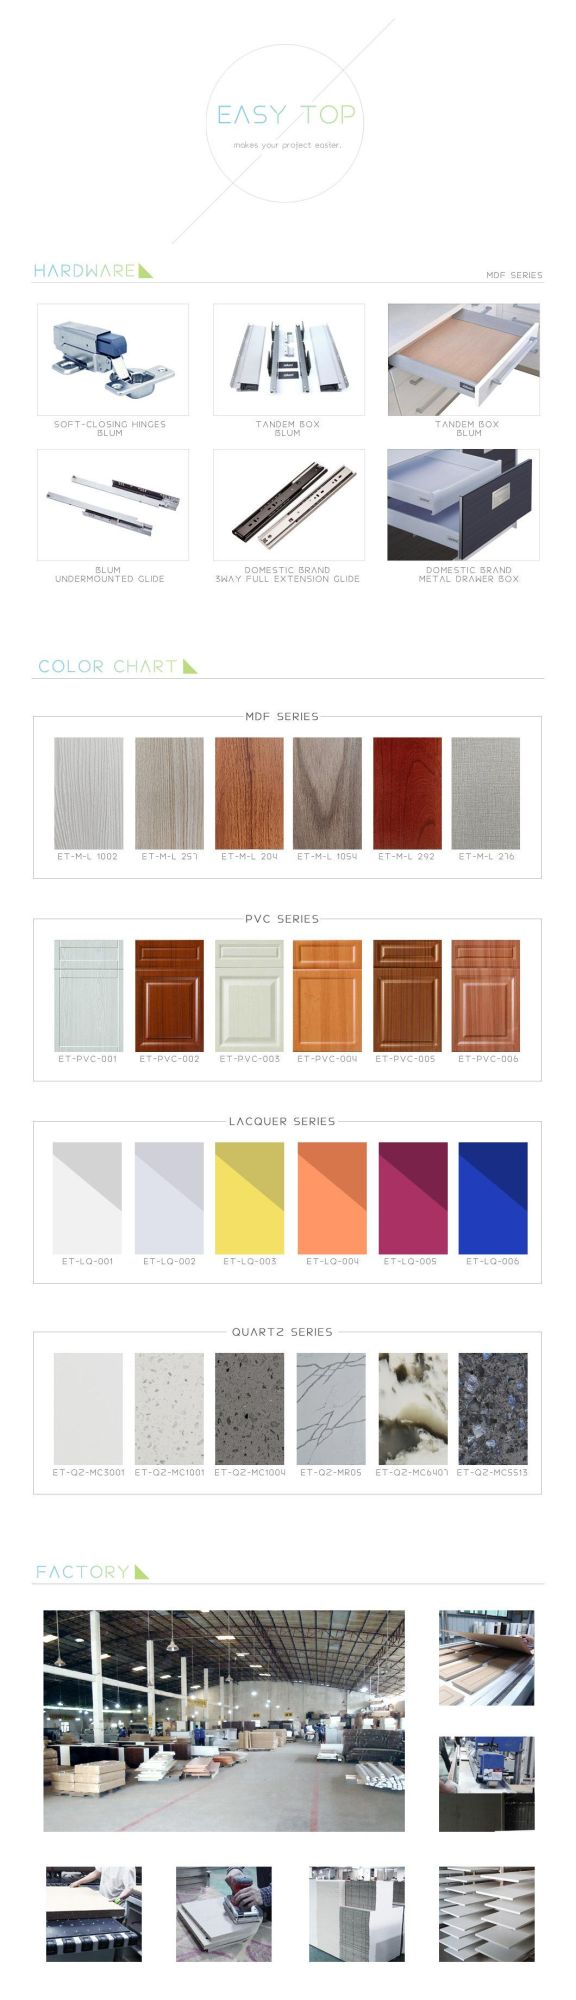 Whole House Customization Tiers Display Shelf U-Shaped Wooden Timber Pantry MFC Ready to Assemble Kitchen Cabinets